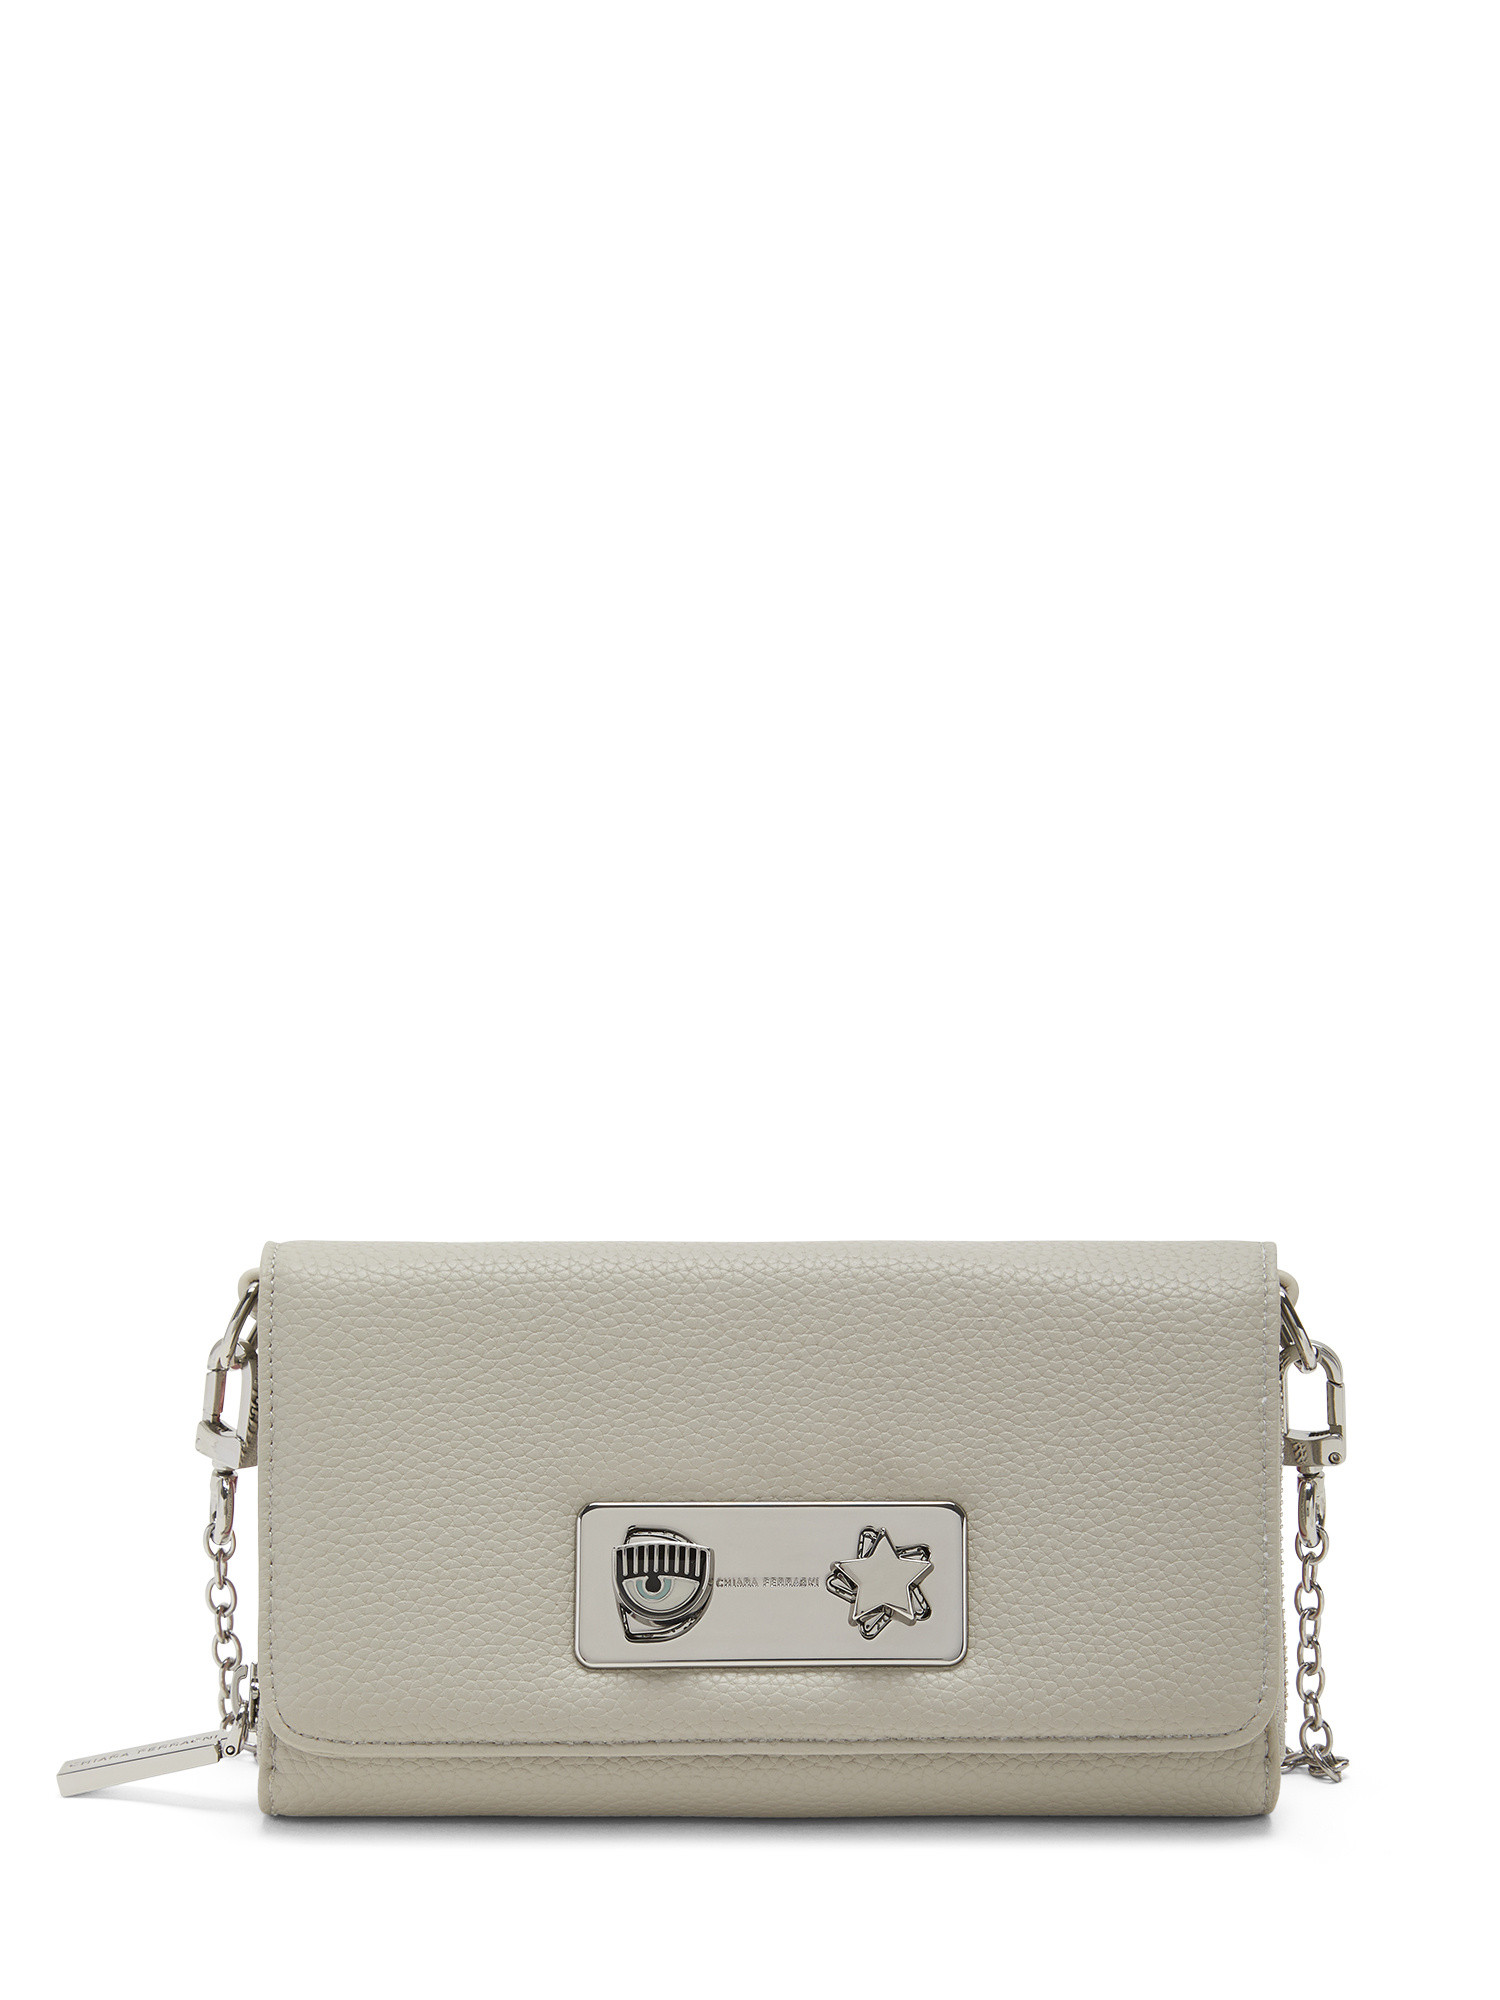 Chiara Ferragni - Clutch bag with logo, TAUPE, large image number 0